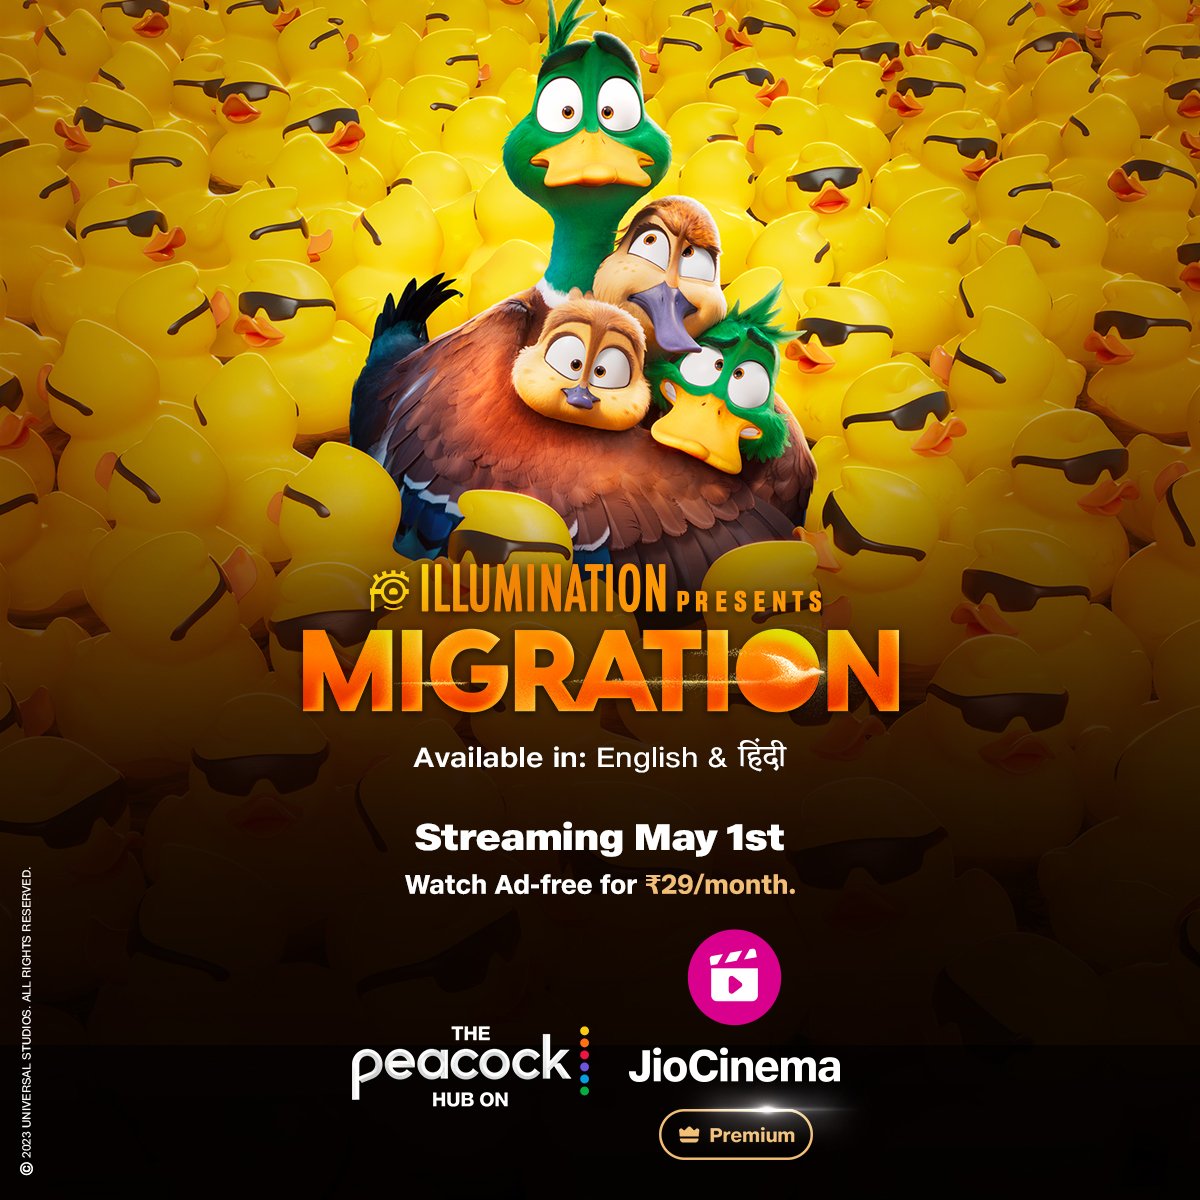 Odd ducks welcome. #Migration streaming on #JioCinema May 1st onwards. Available in #English & #Hindi.